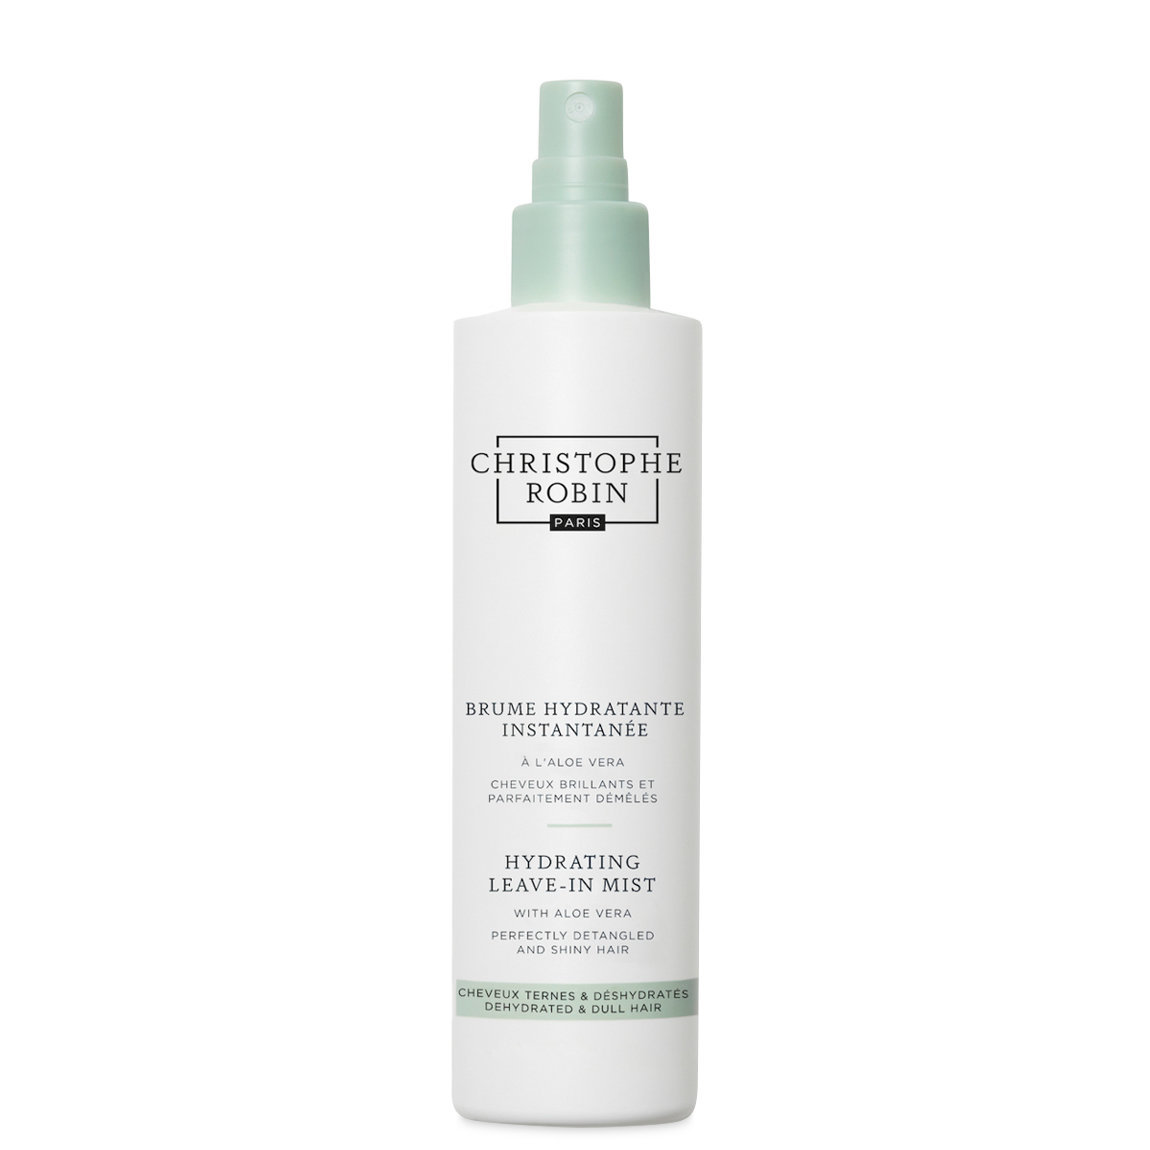 Christophe Robin Hydrating Leave-In Mist with Aloe Vera alternative view 1 - product swatch.